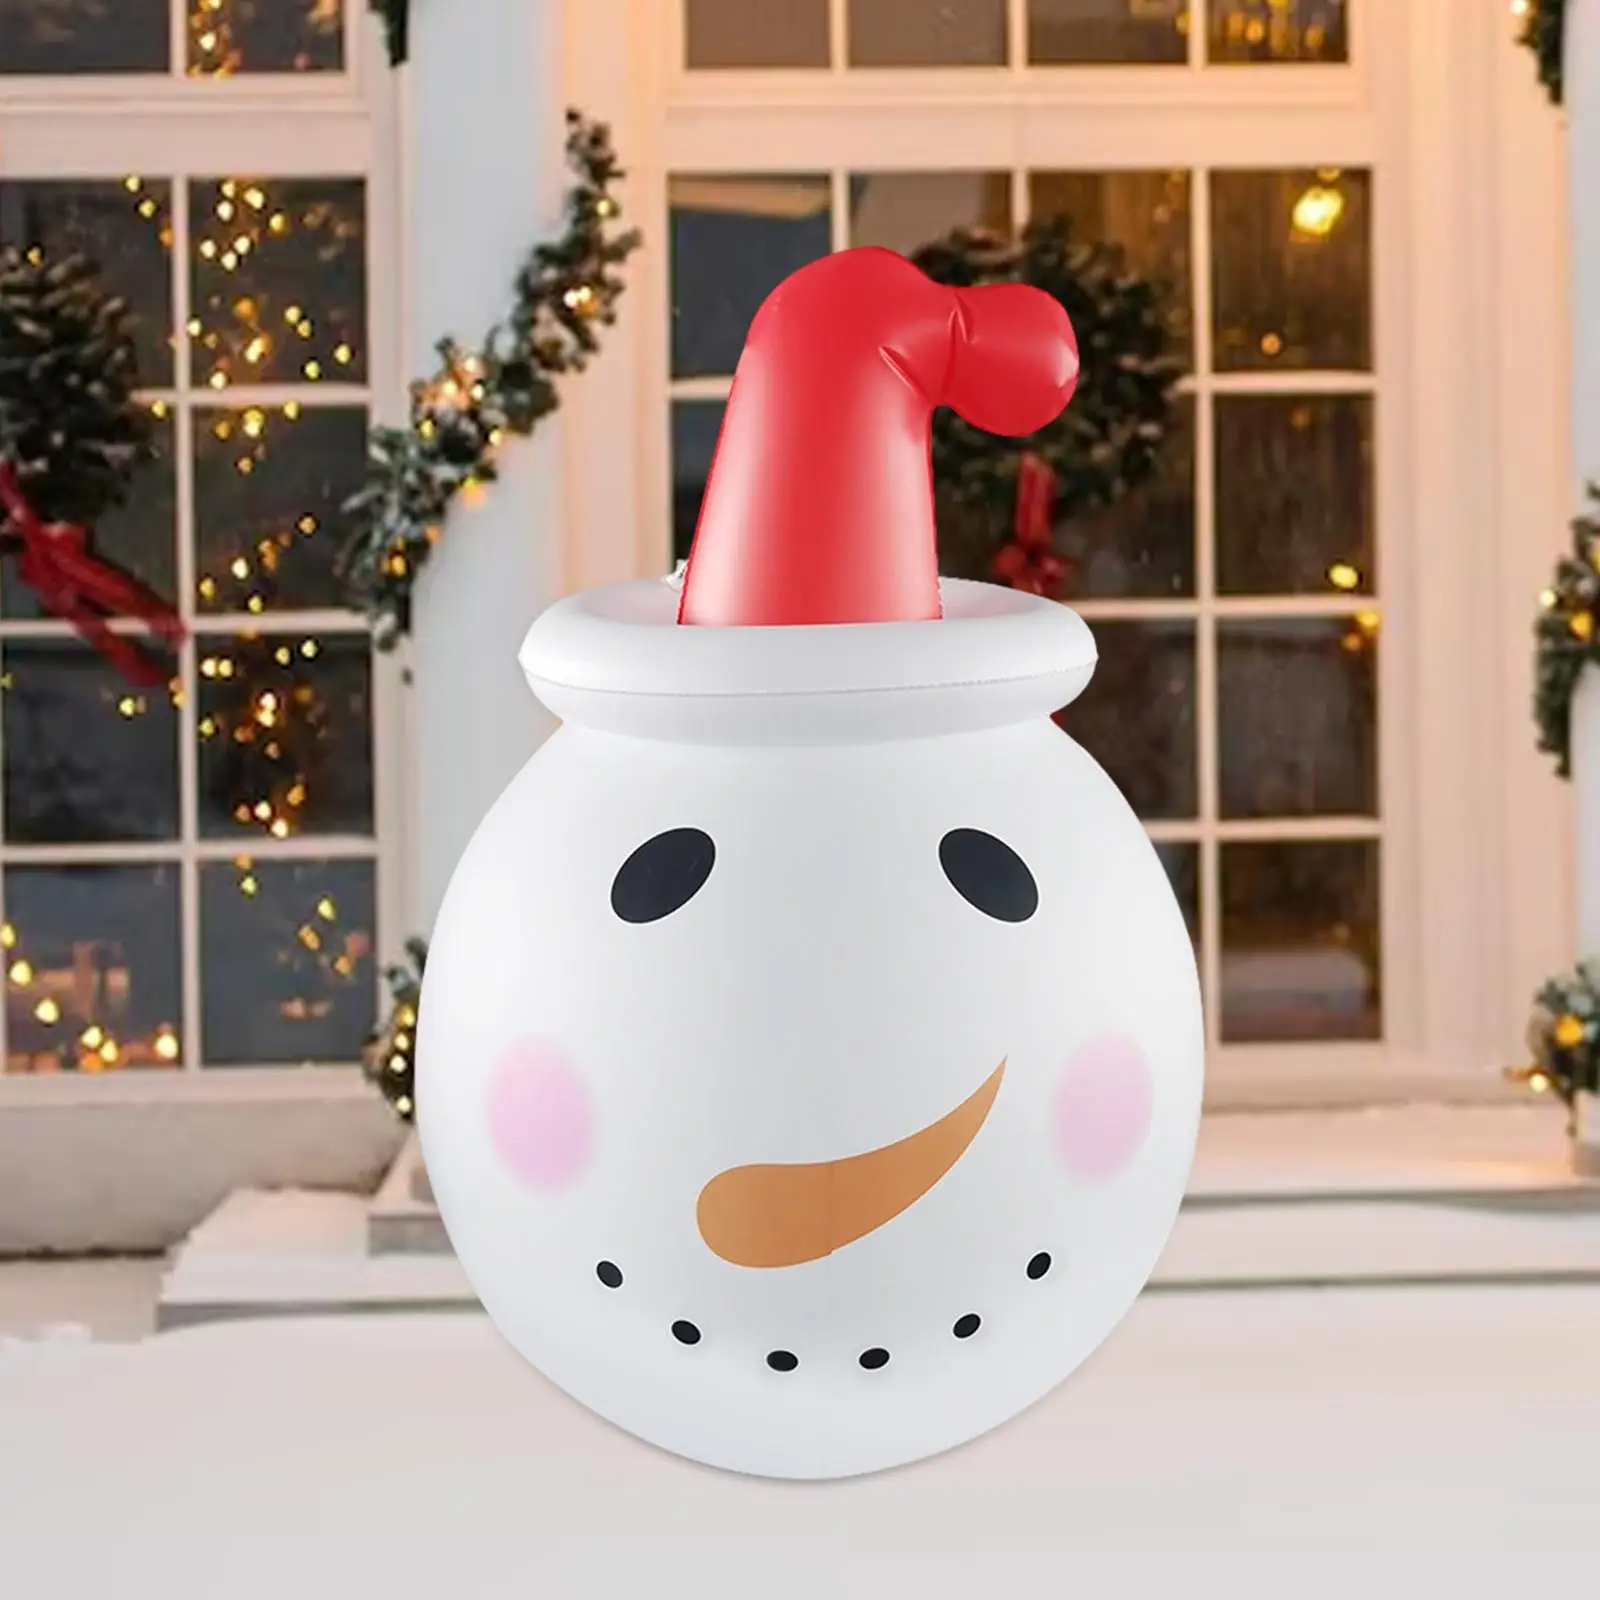 Christmas Inflatable Snowman Ornament Decorative Artwork with Light for Xmas Party Office Outdoor and Indoor Living Room Garden